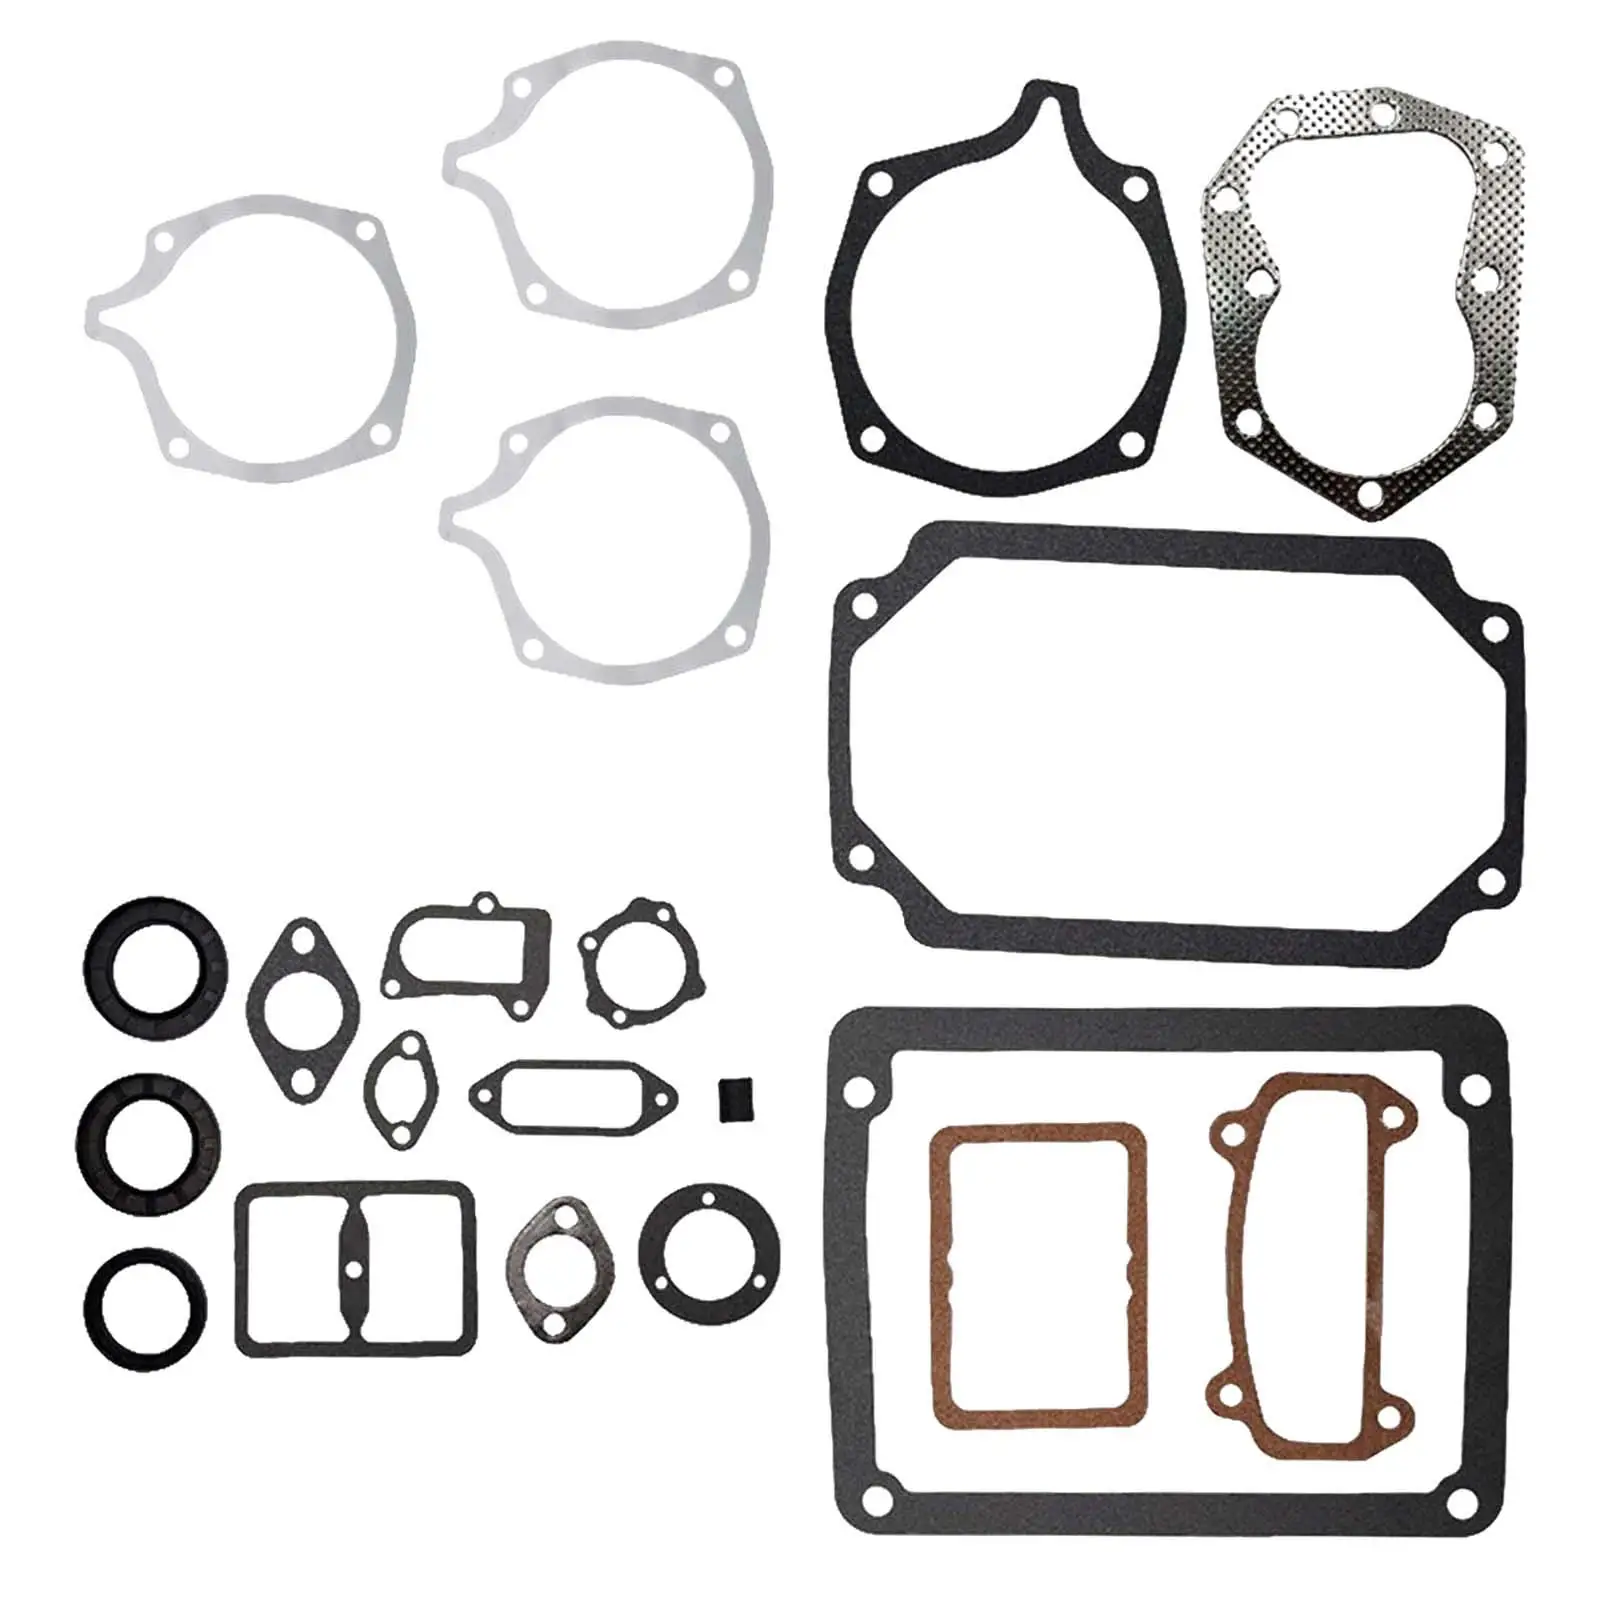 47 755 08-S Gasket Set   Accessories Fits for  K241 Mowers 10 12 14 Engines Horticulture Lawn